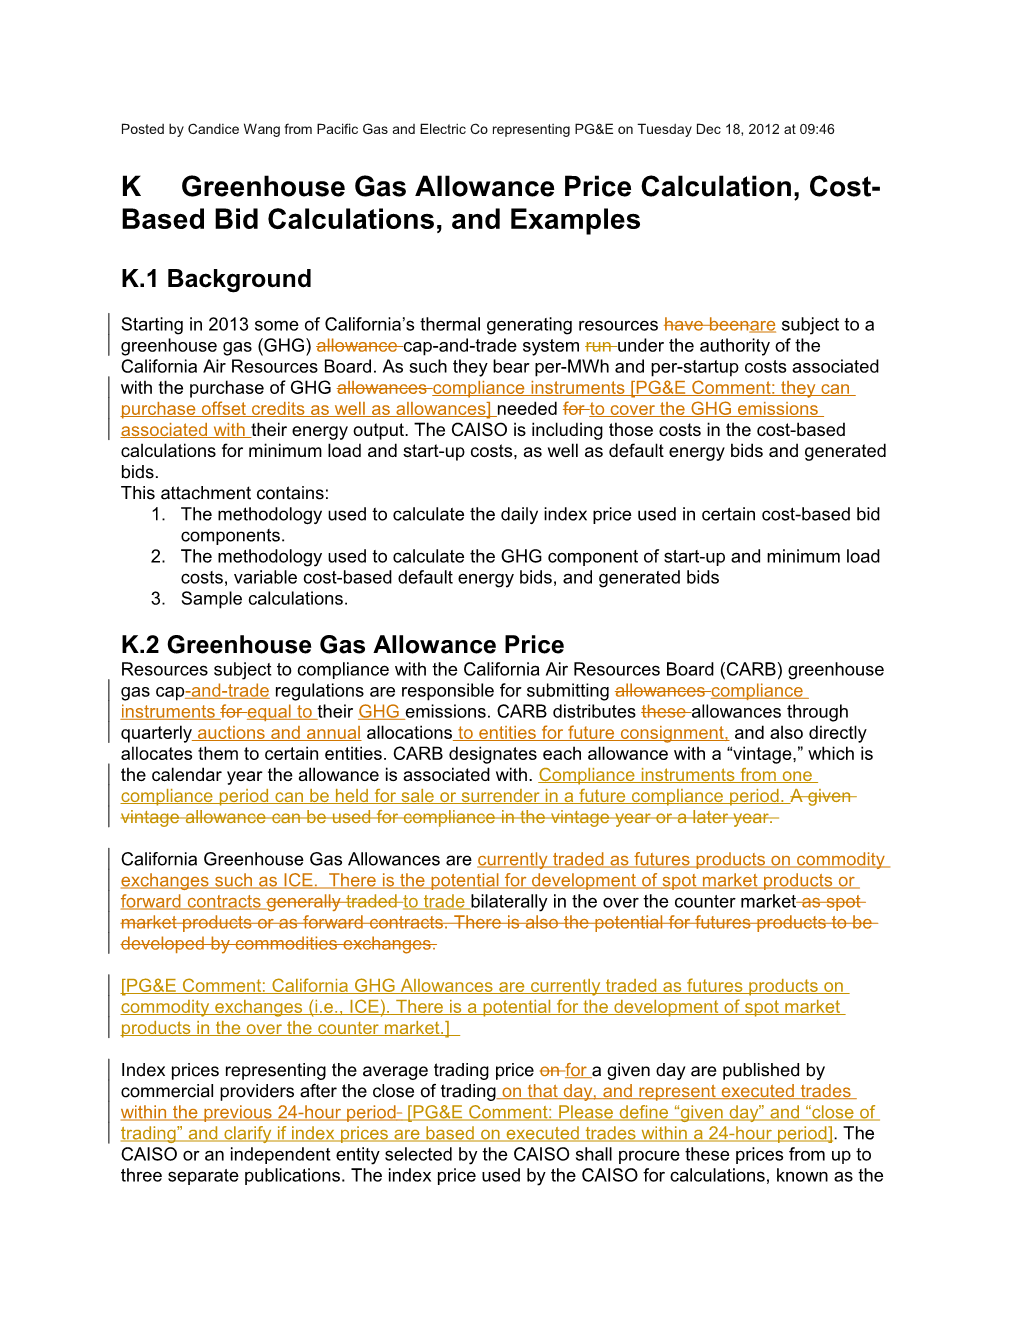 Kgreenhouse Gas Allowance Price Calculation, Cost-Based Bid Calculations,And Examples